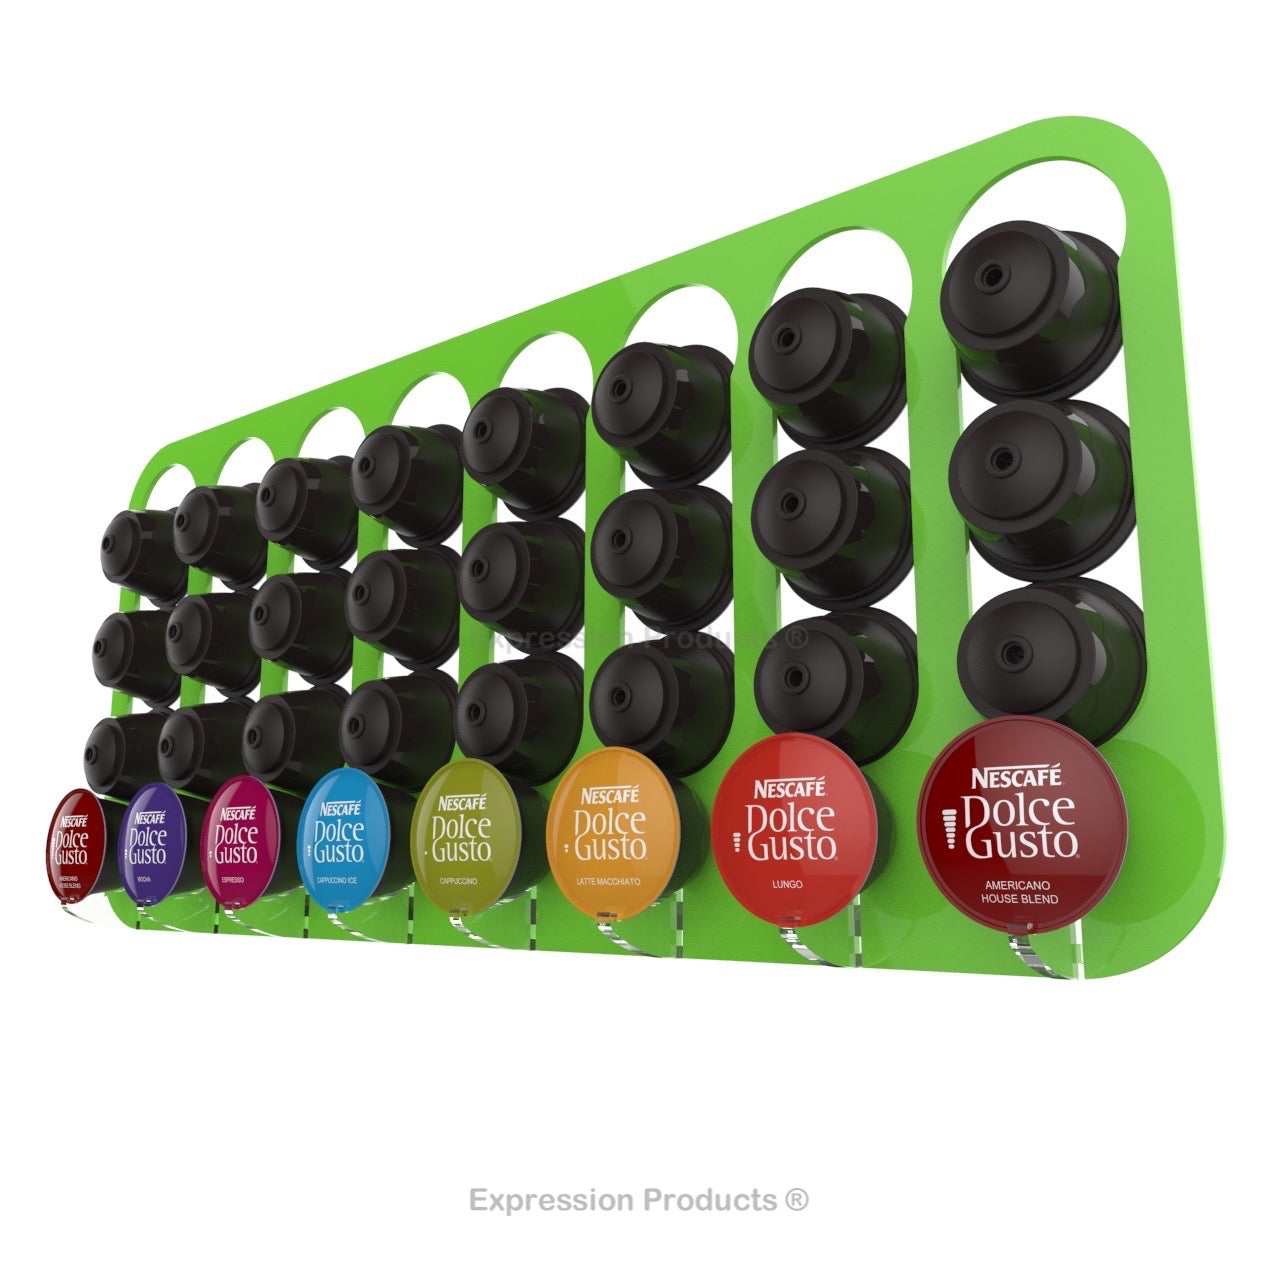 Dolce gusto coffee pod holder, wall mounted, half height.  Shown in lime holding 32 pods